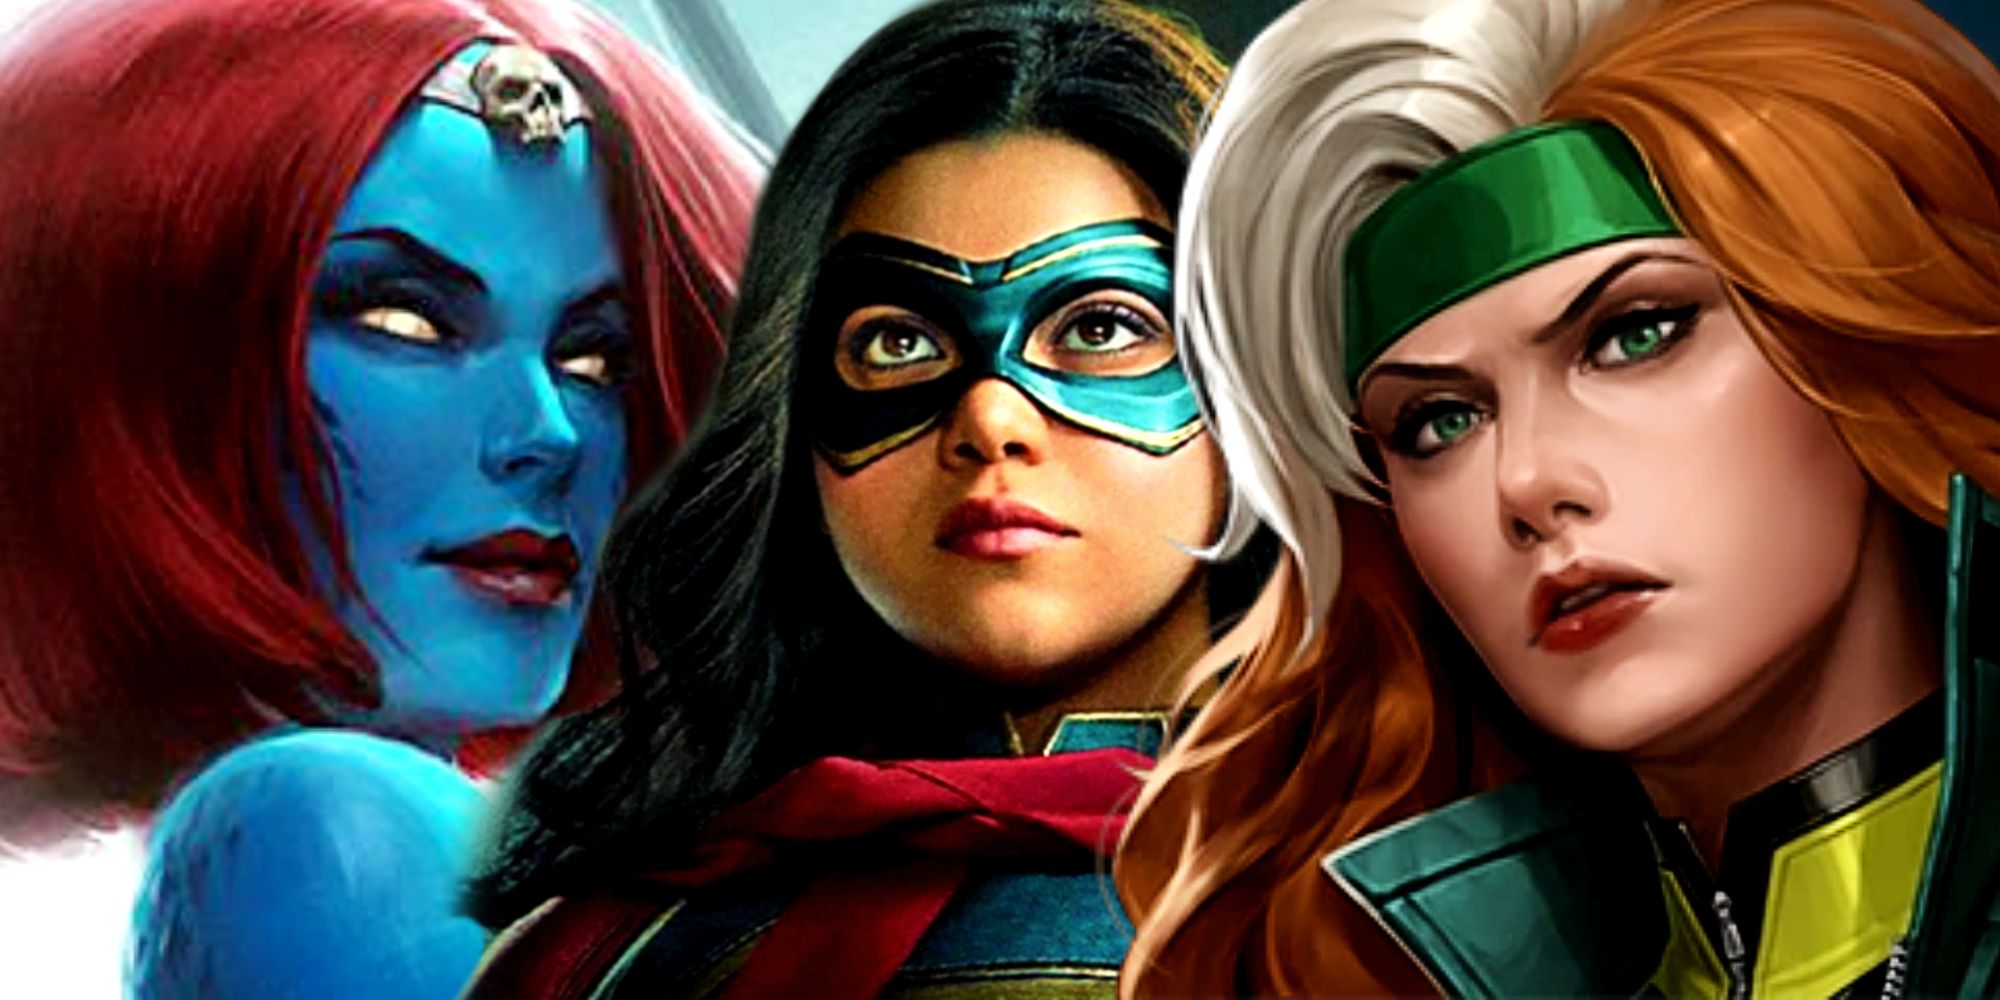 Rogue, Mystique, and Kamala Khan in the MCU's The Marvels